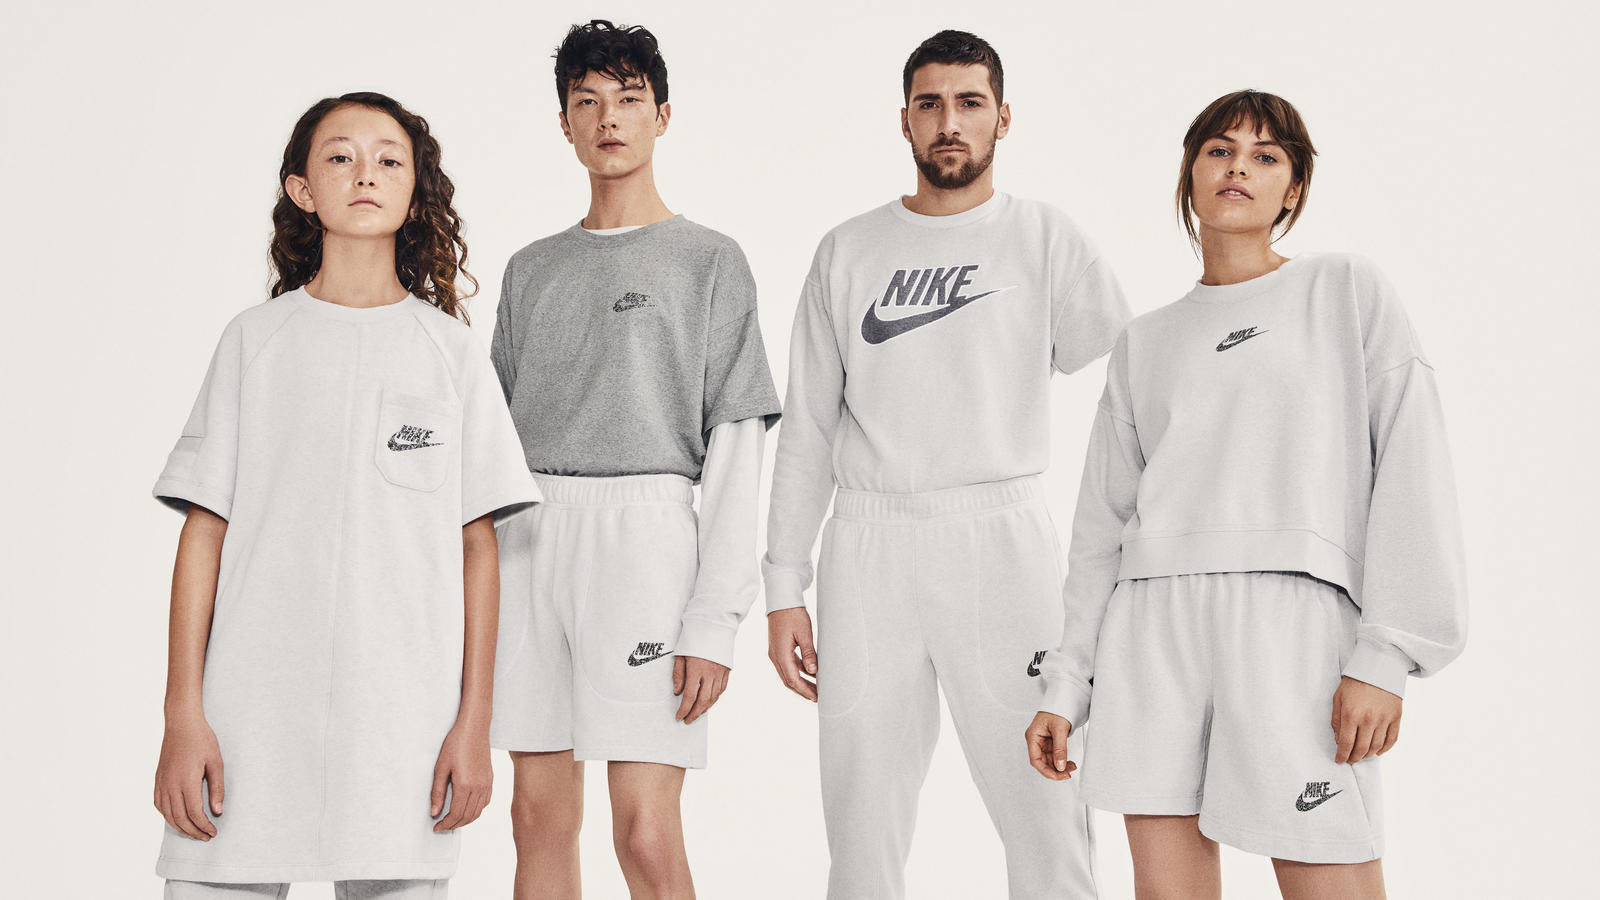 Nike champions sustainability the new Revival apparel collection